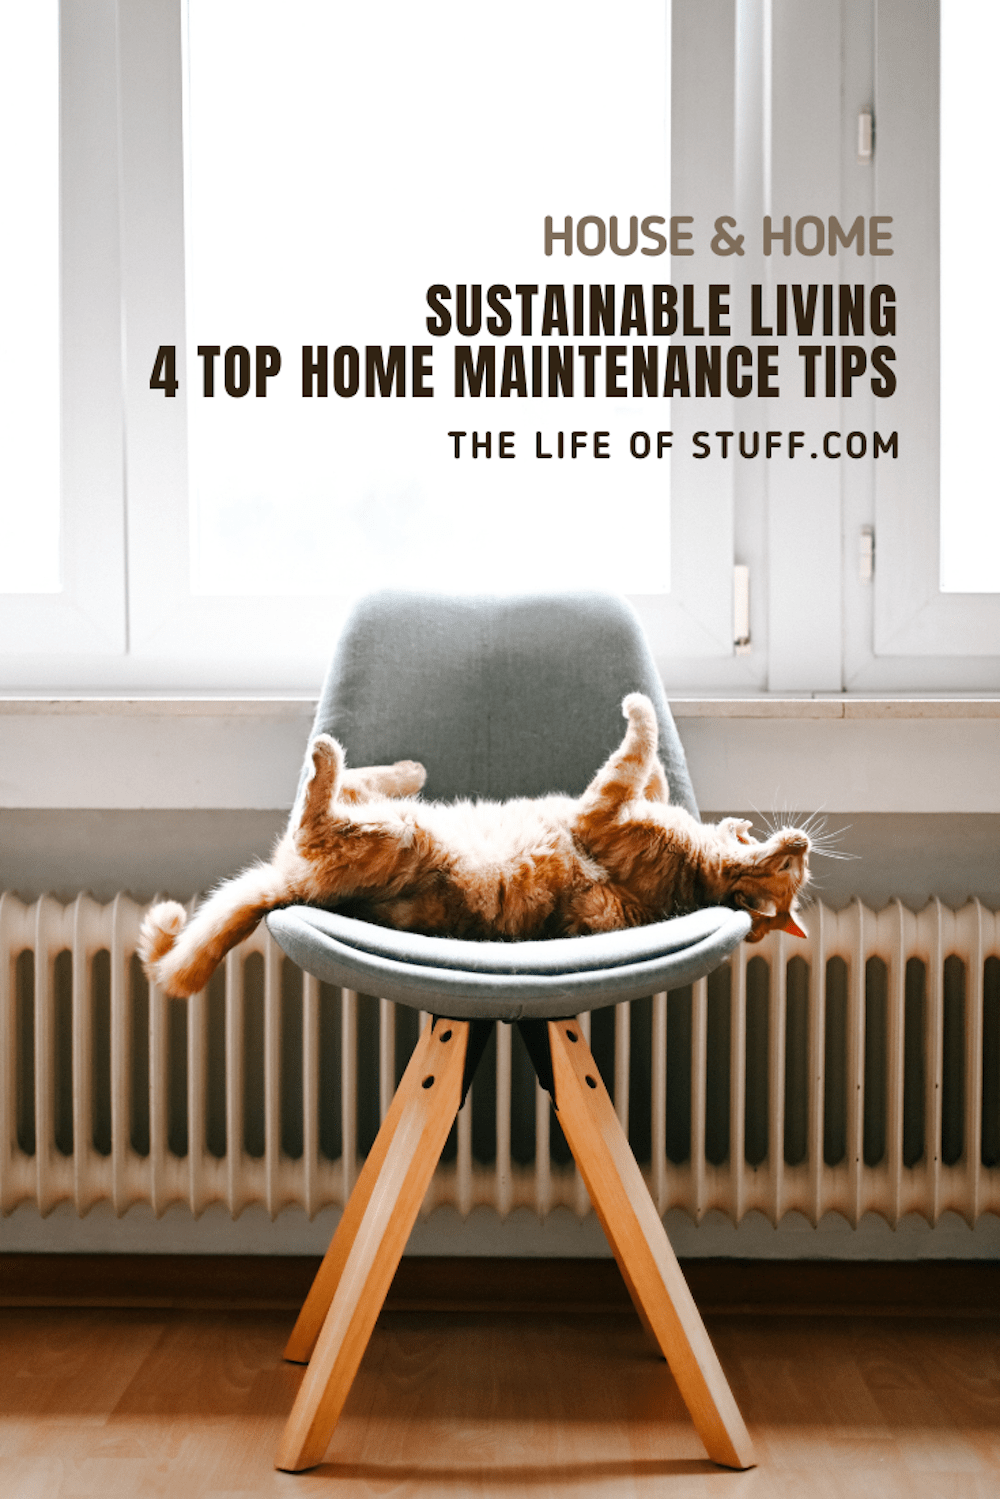 Sustainable Living - 4 Top Home Maintenance Tips - The Life of Stuff